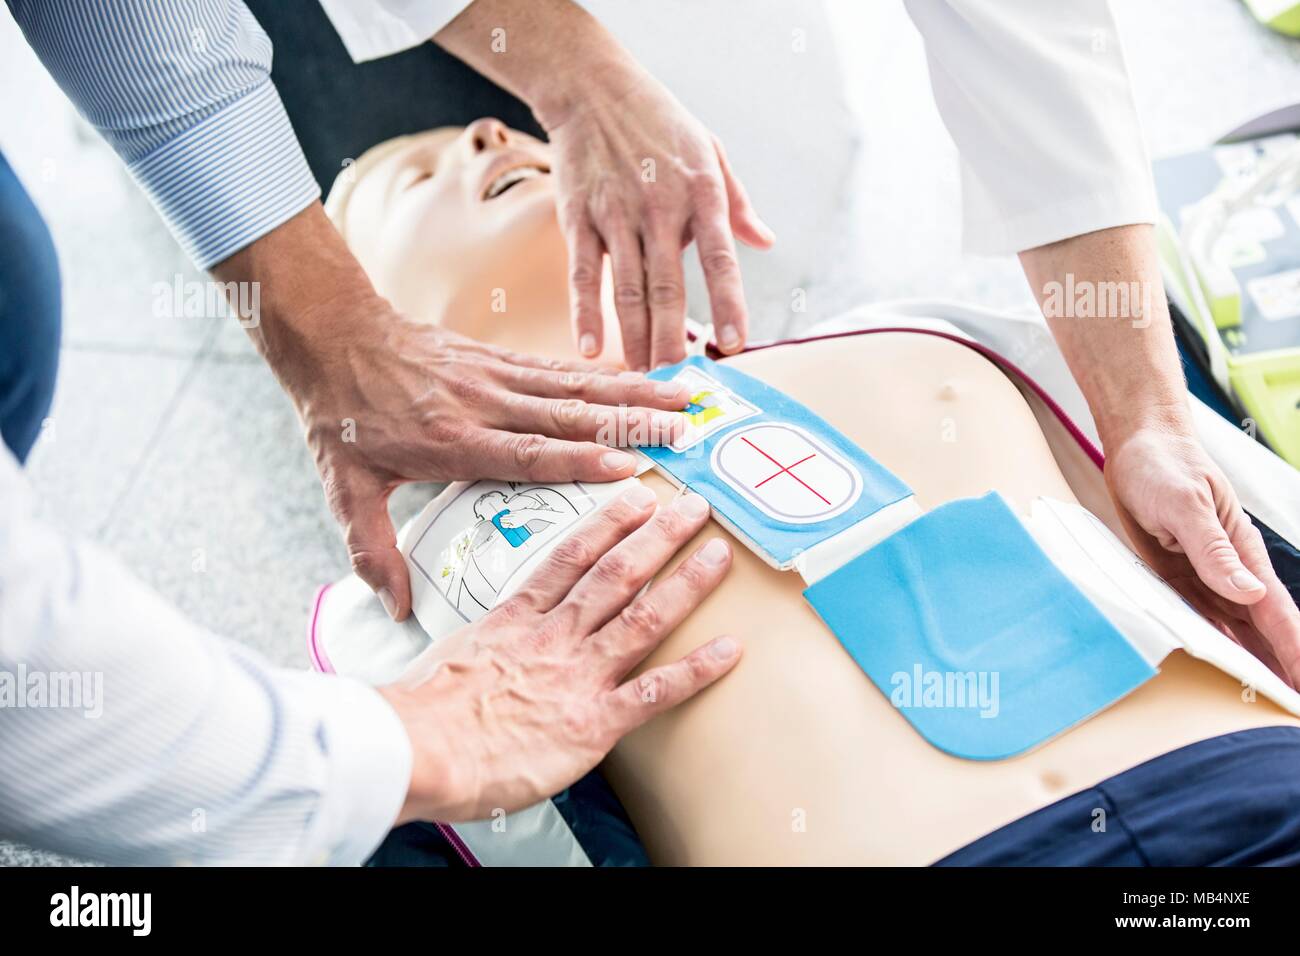 First-aider placing automated external defibrillator (AED) pads on a CPR training dummy. Stock Photo